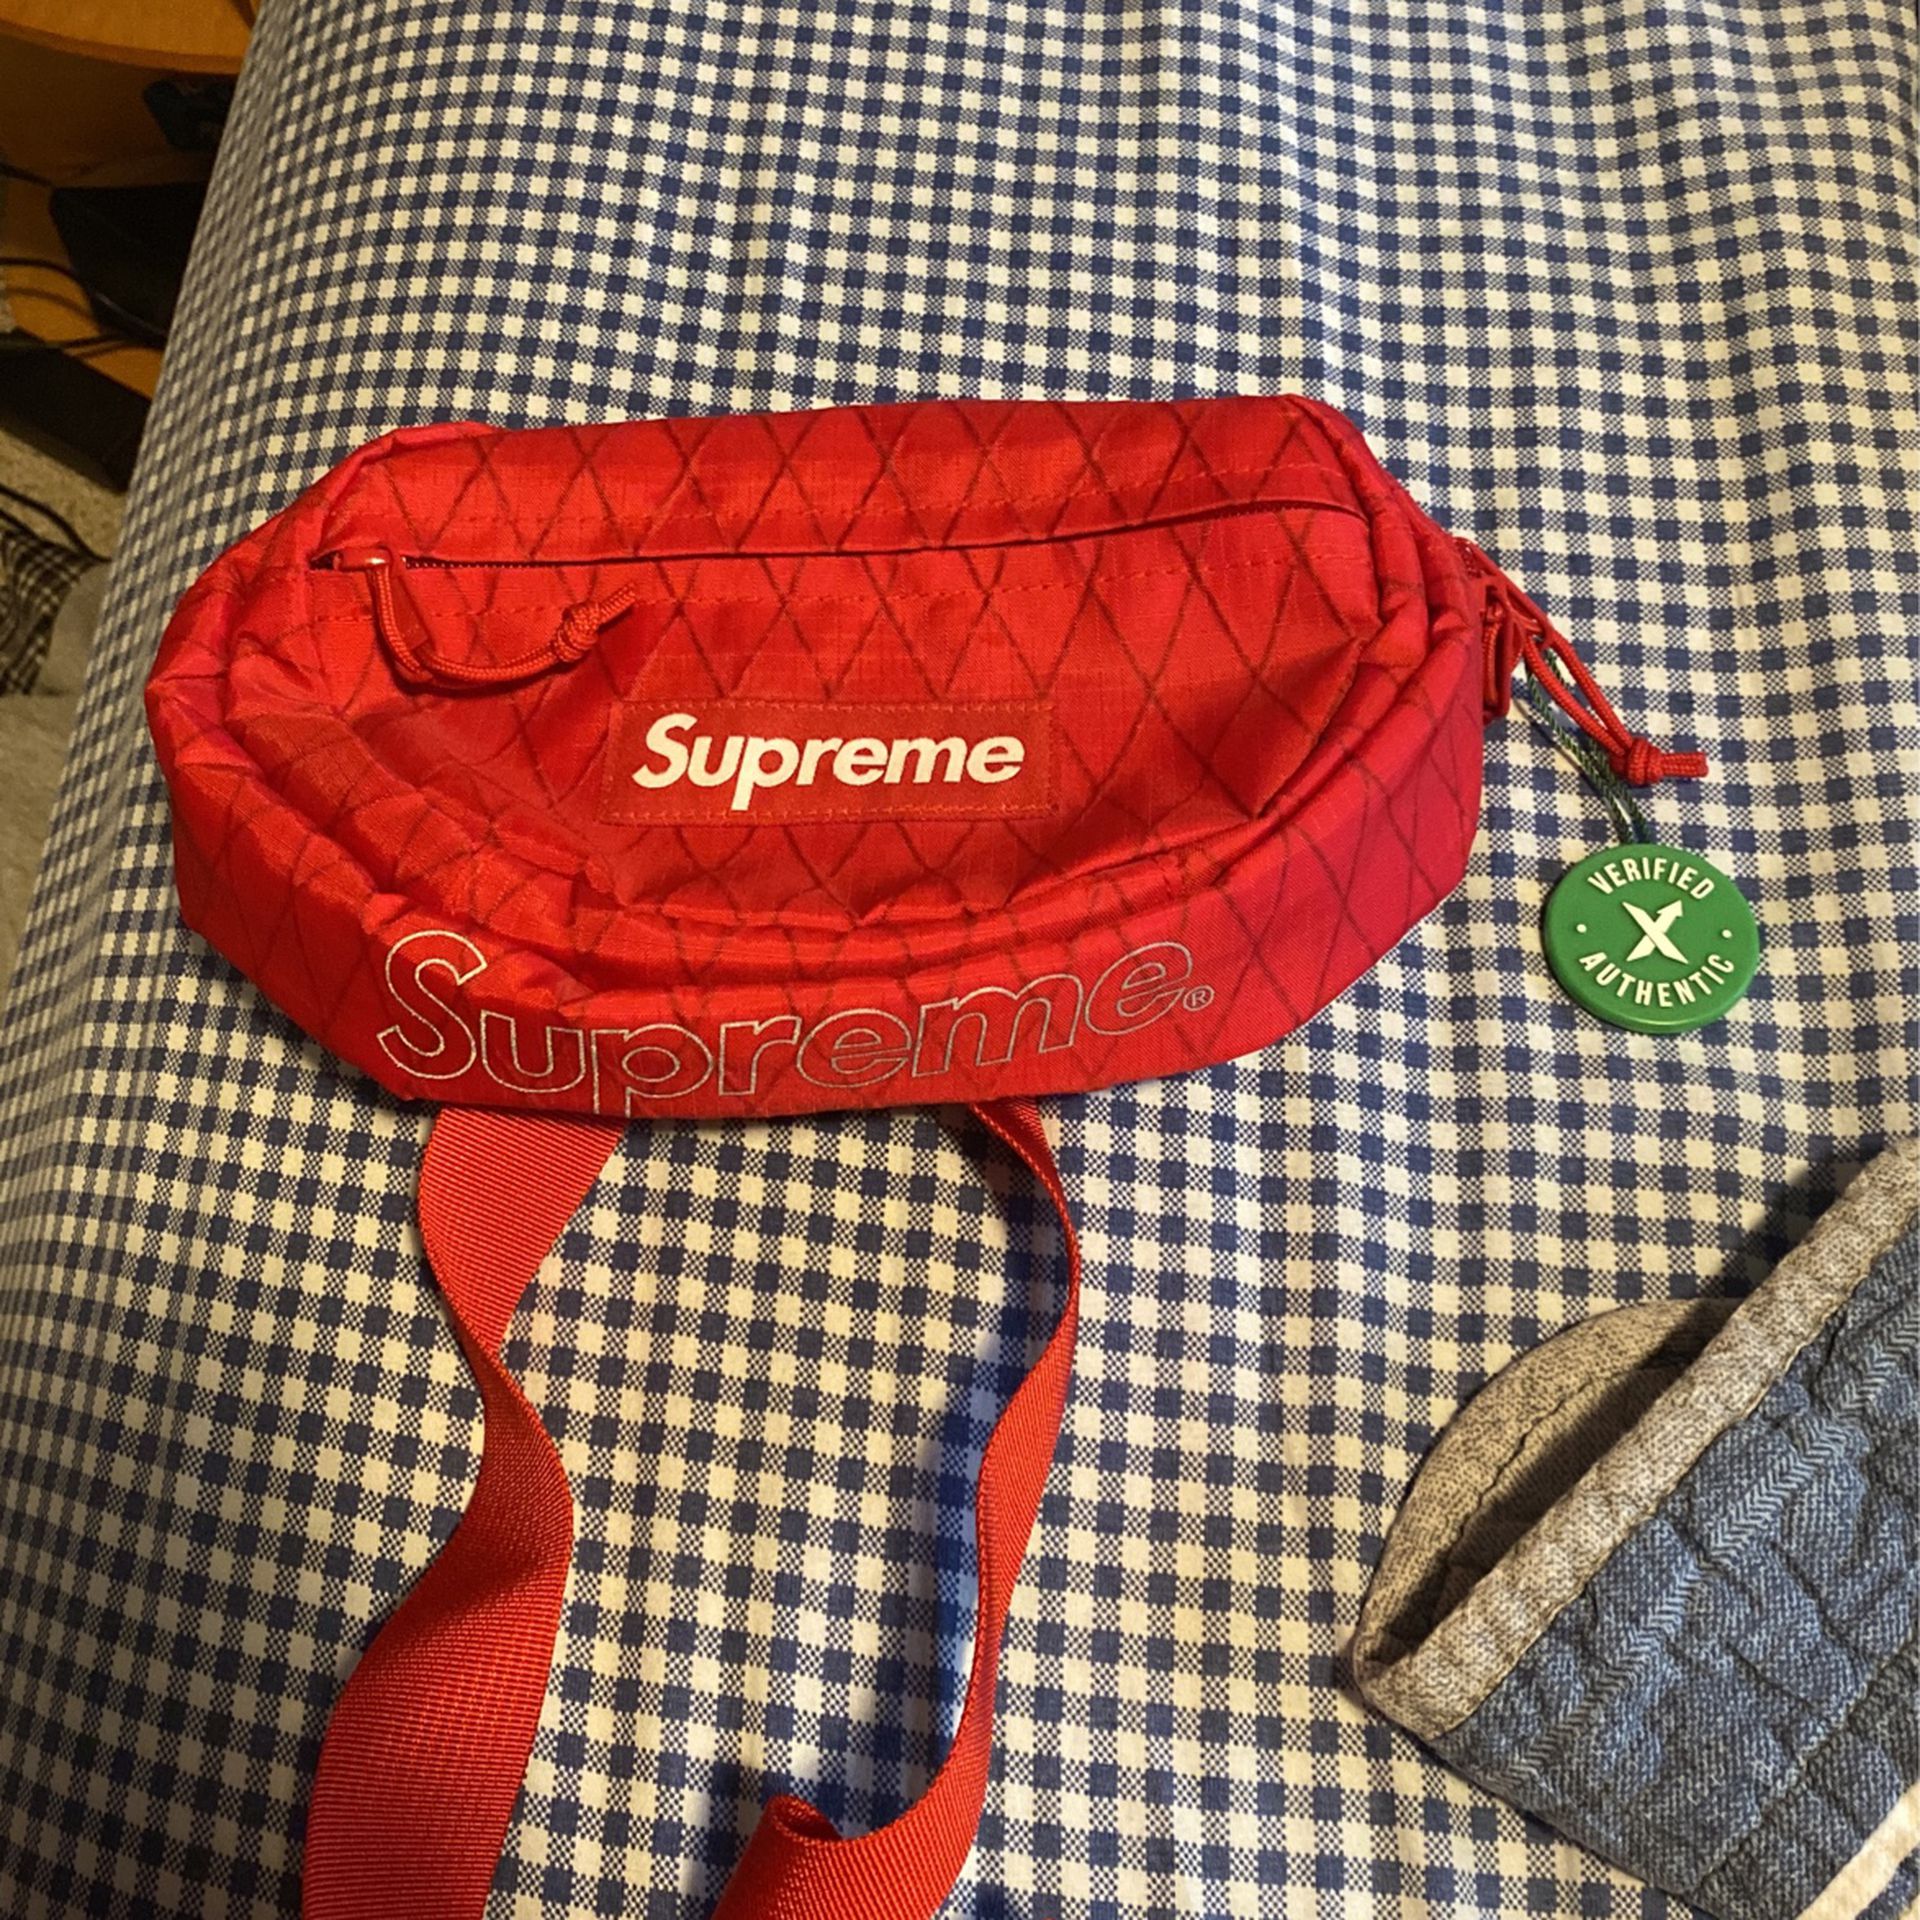 Supreme Red Fanny Pack Verified Authentic 